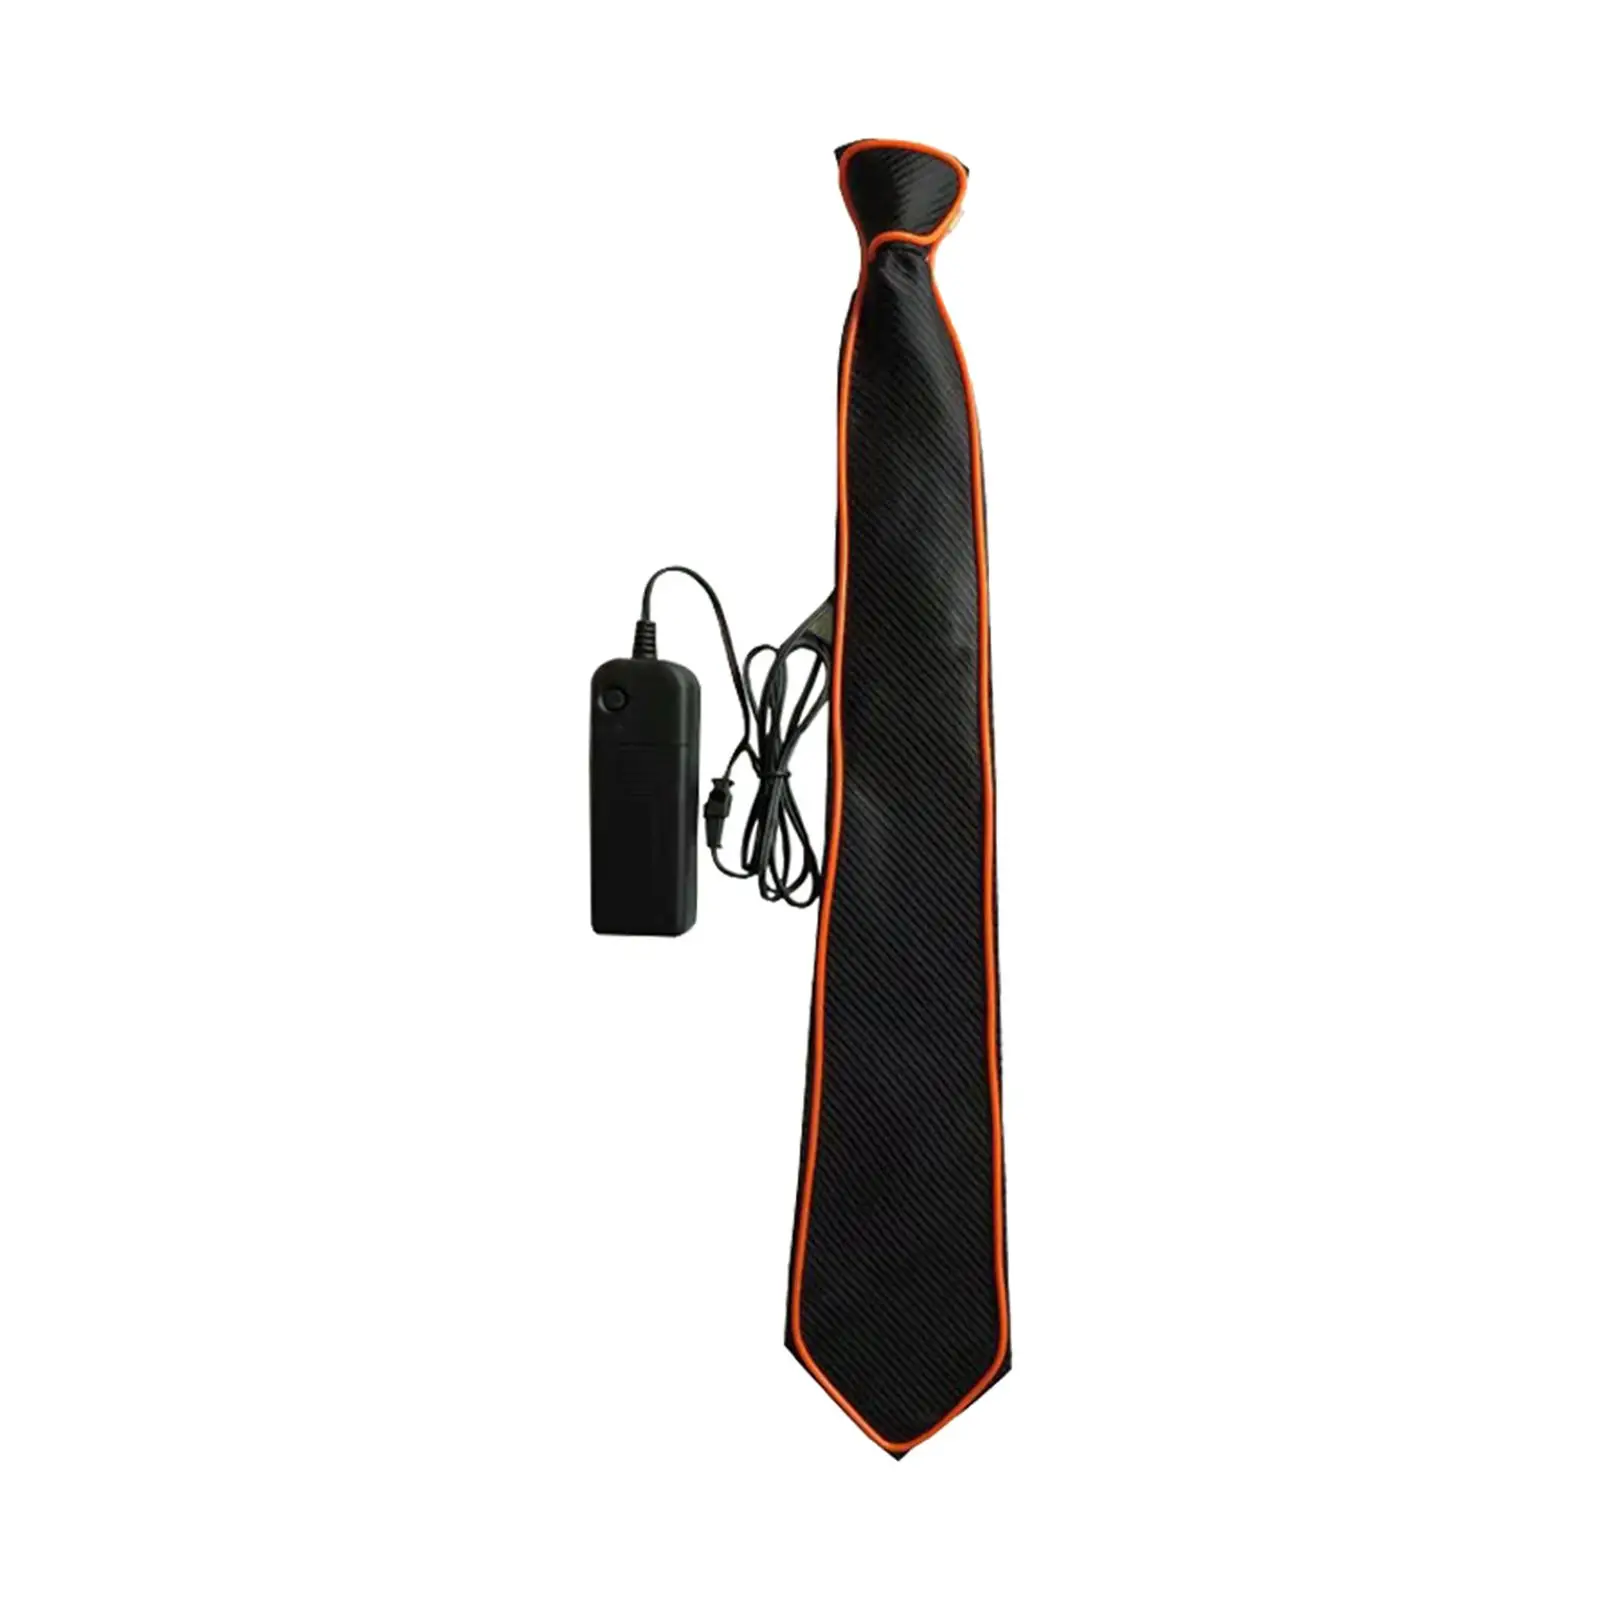 Mens Glowing tie Size Formal Flashing Necktie Luminous Novelty LED Necktie for Parties Halloween Fashion Show Clubs Festival